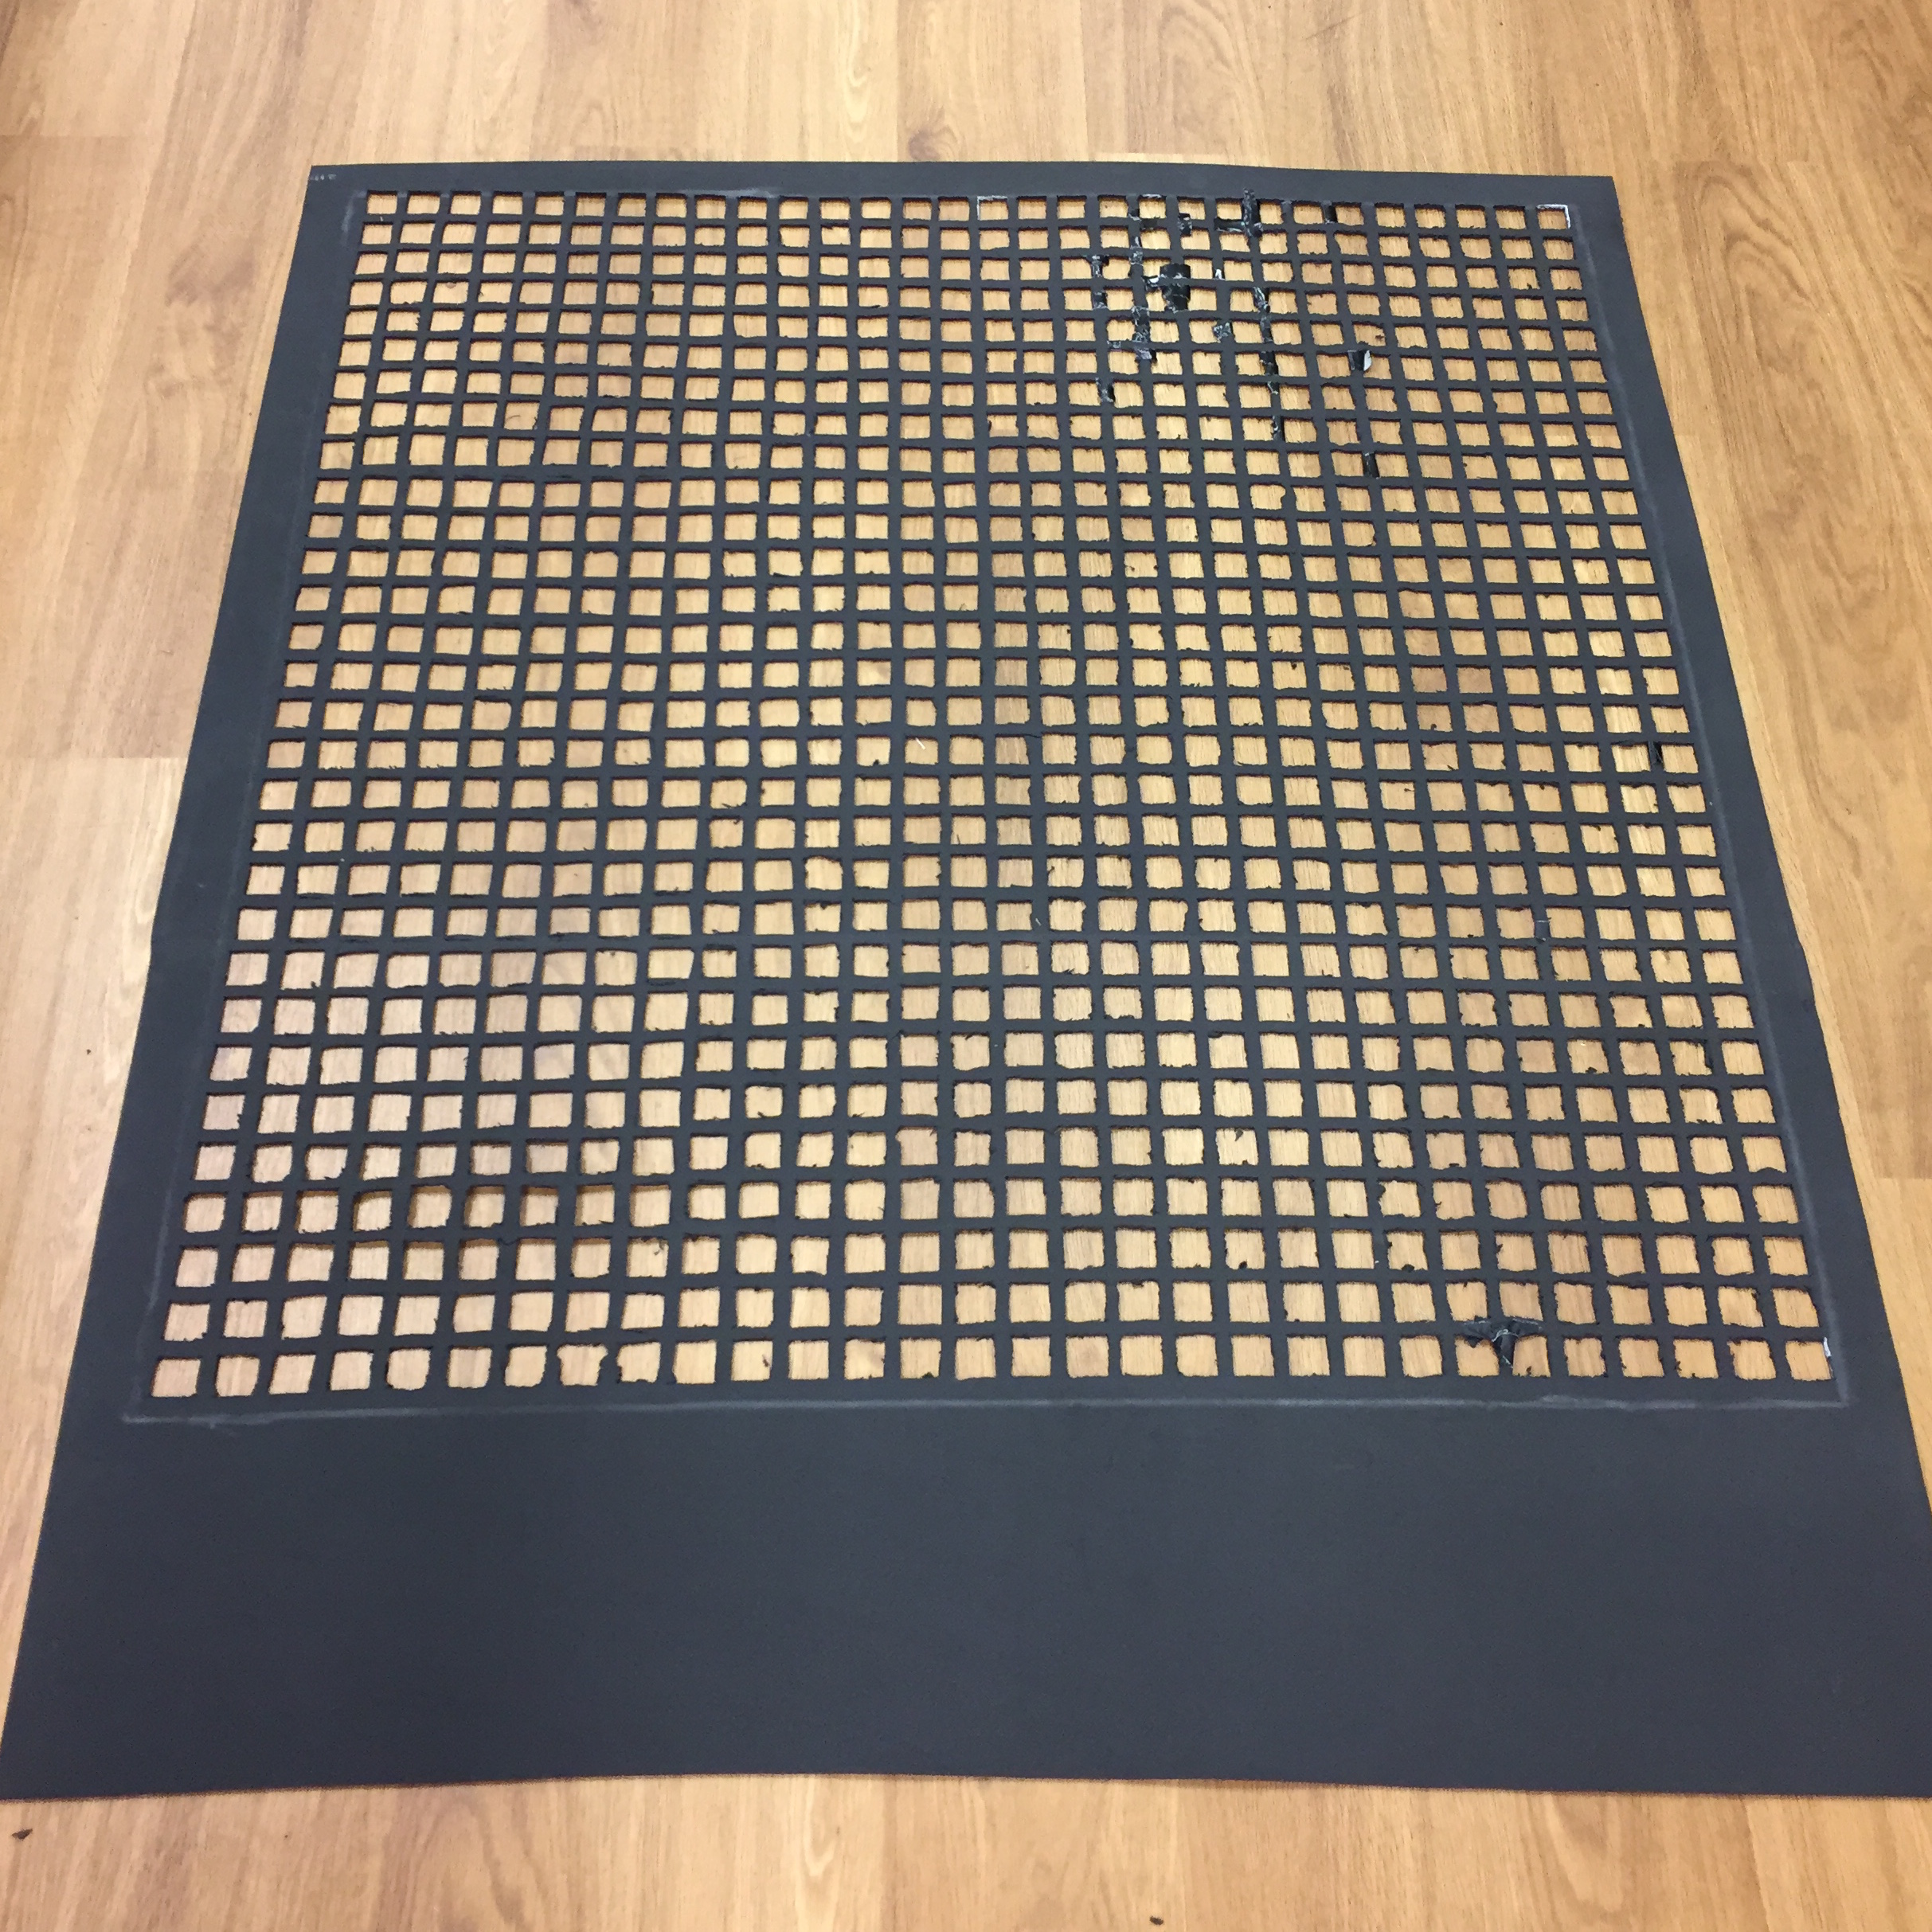 One meter by one meter with 30 by 30 grid made of about 1 inch holes